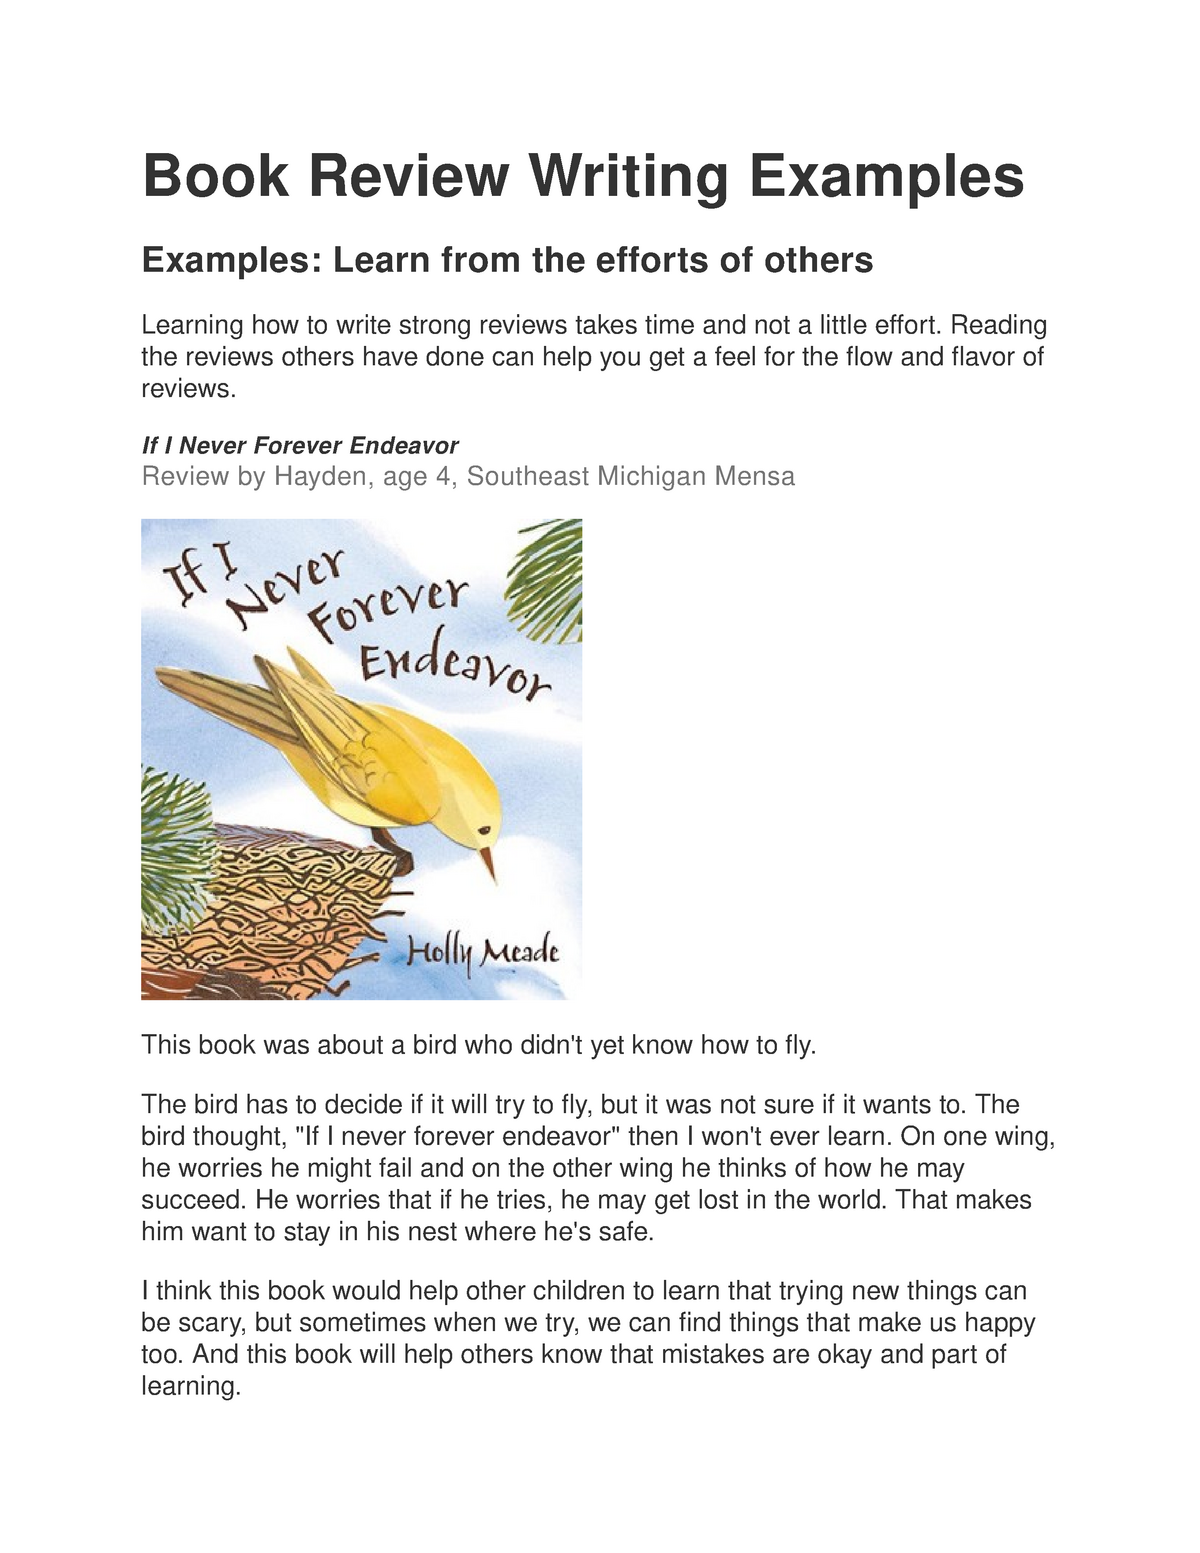 learning intention for writing a book review